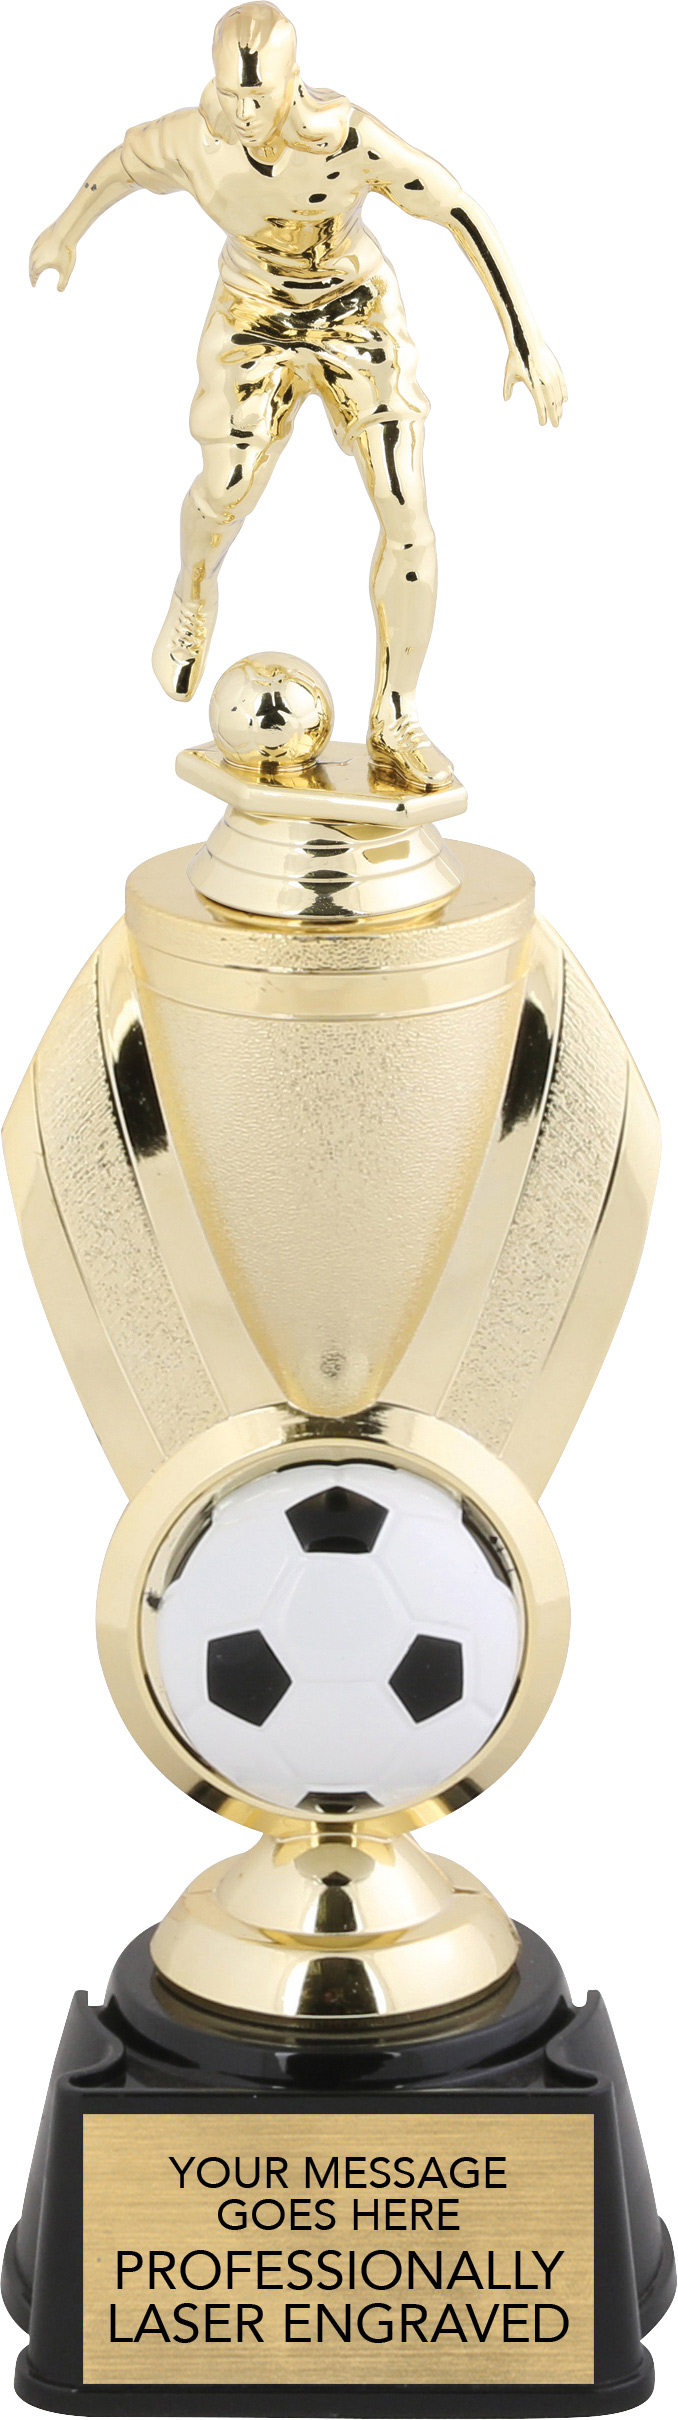 Soccer Female Victory Cup Riser Trophy